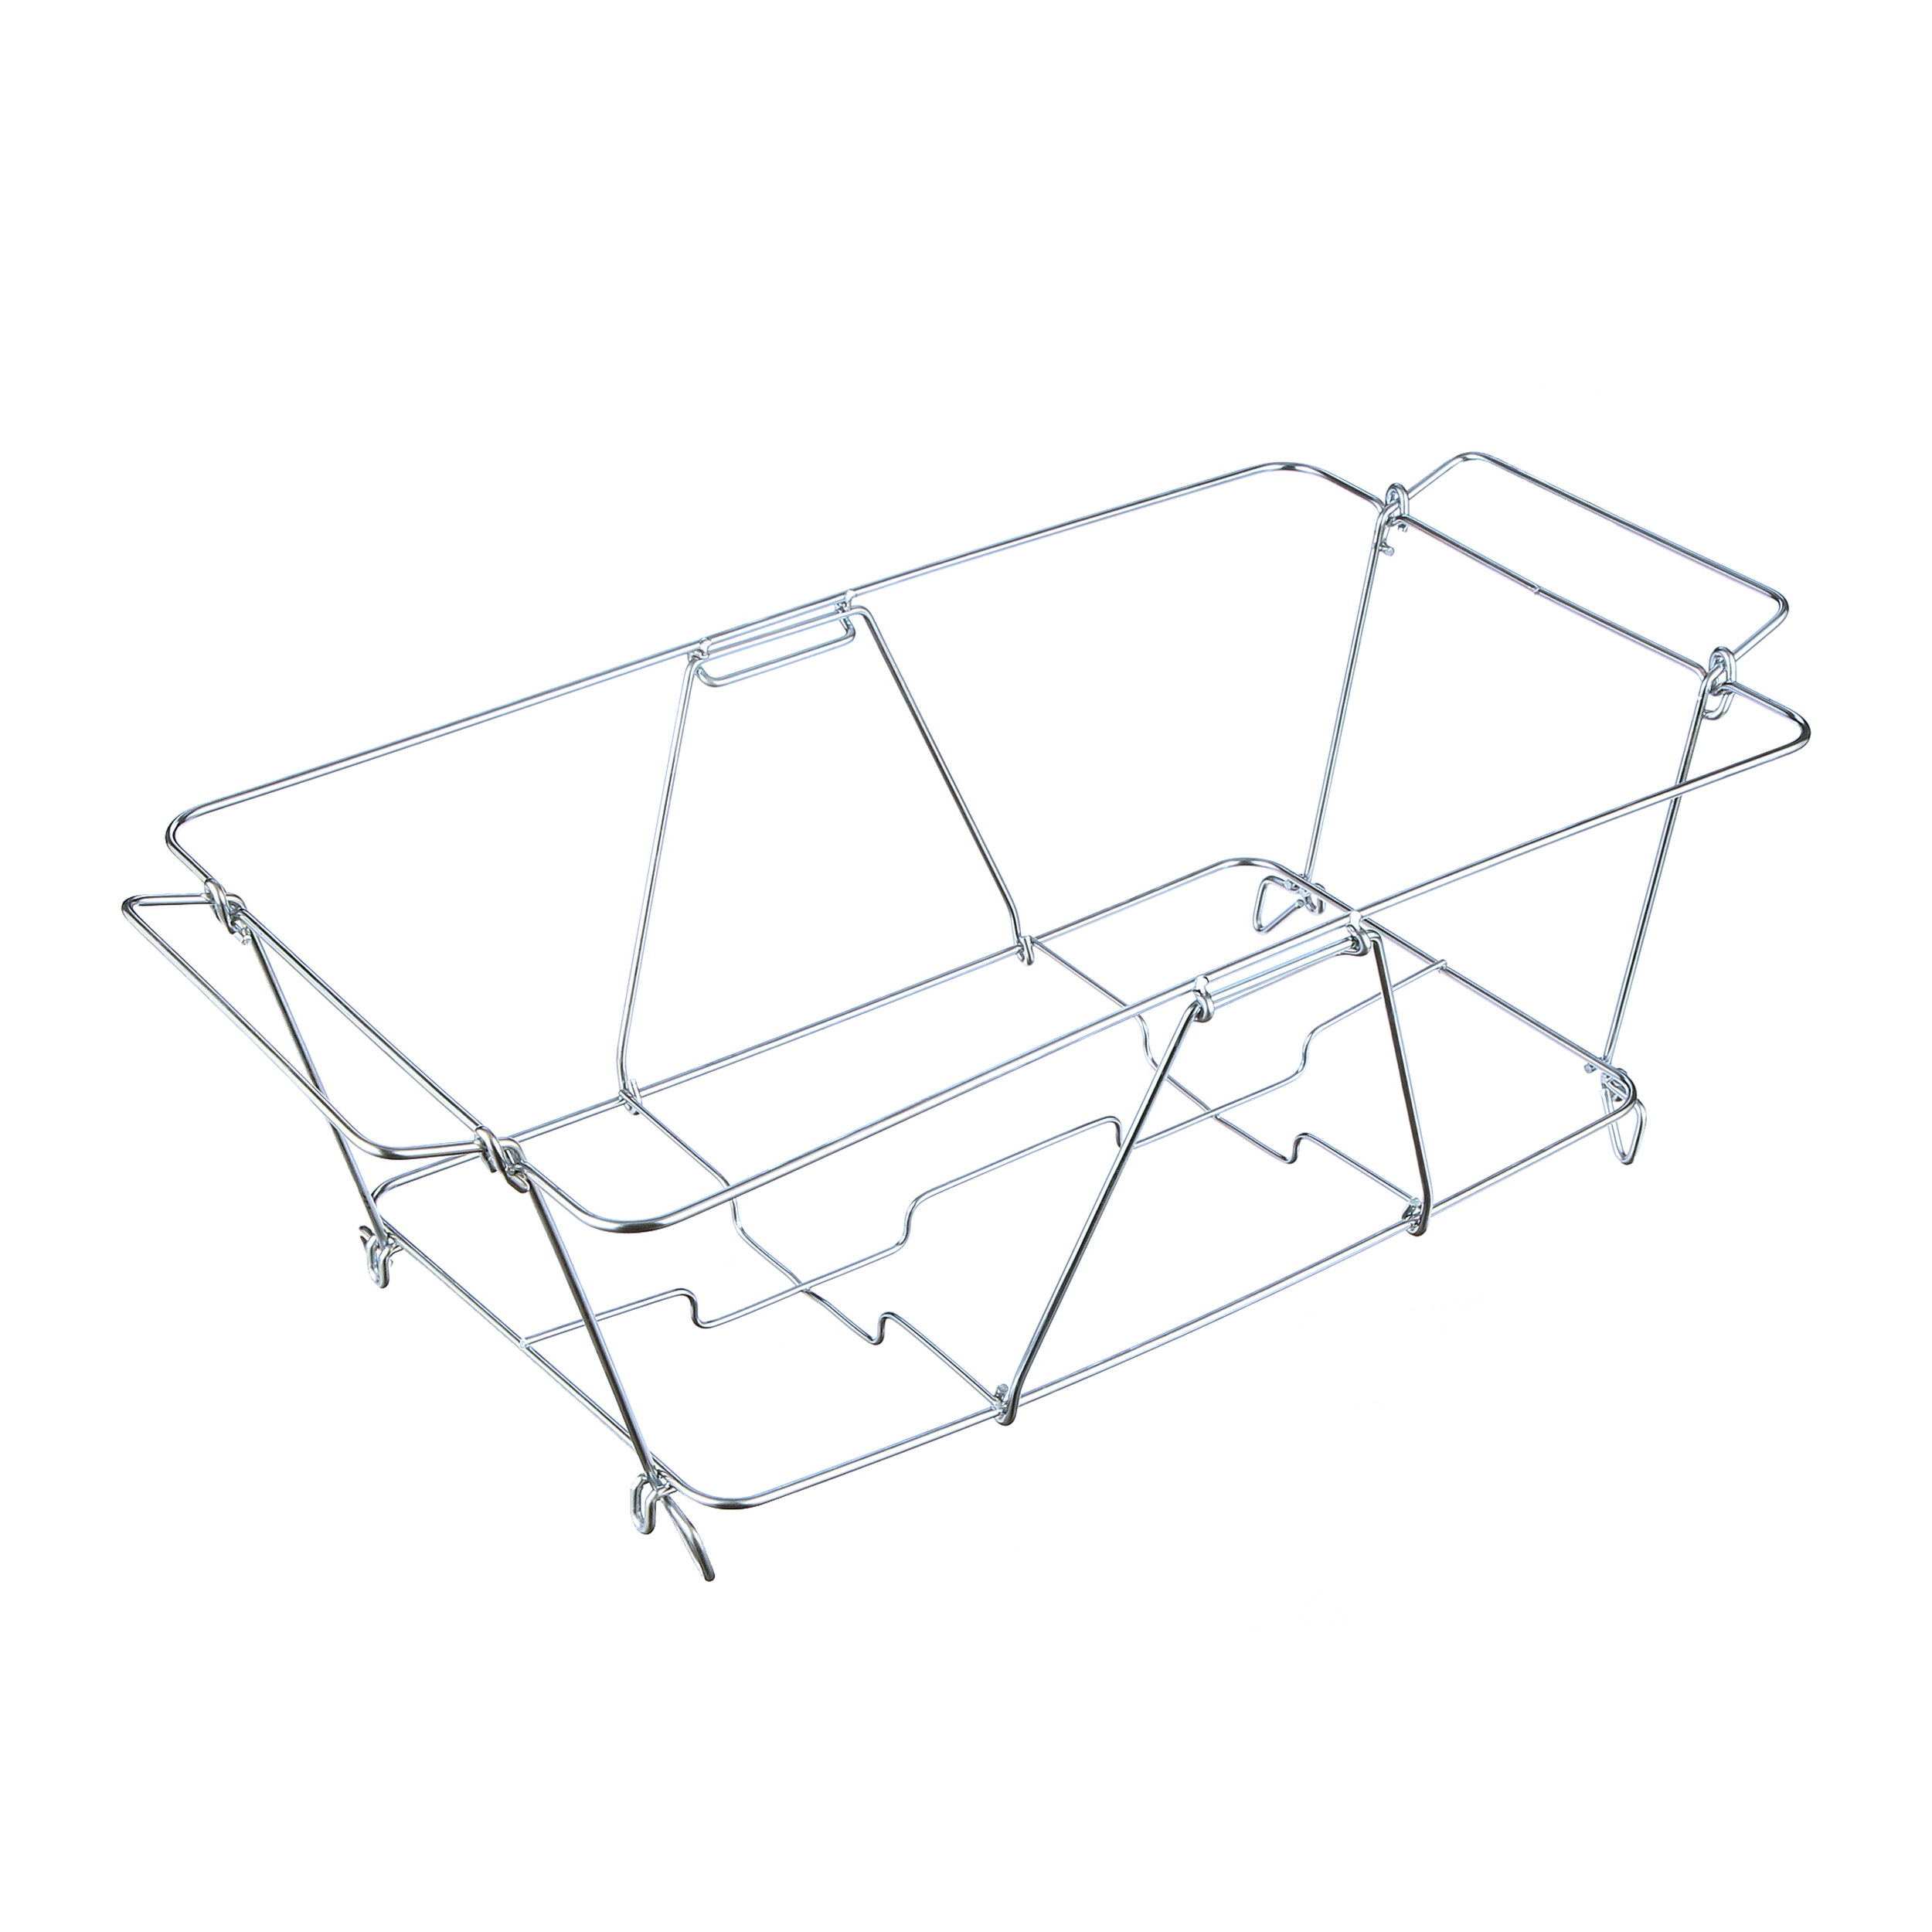 Sterno Folding Wire Chafing Rack, Standard Size, Silver - image 5 of 6